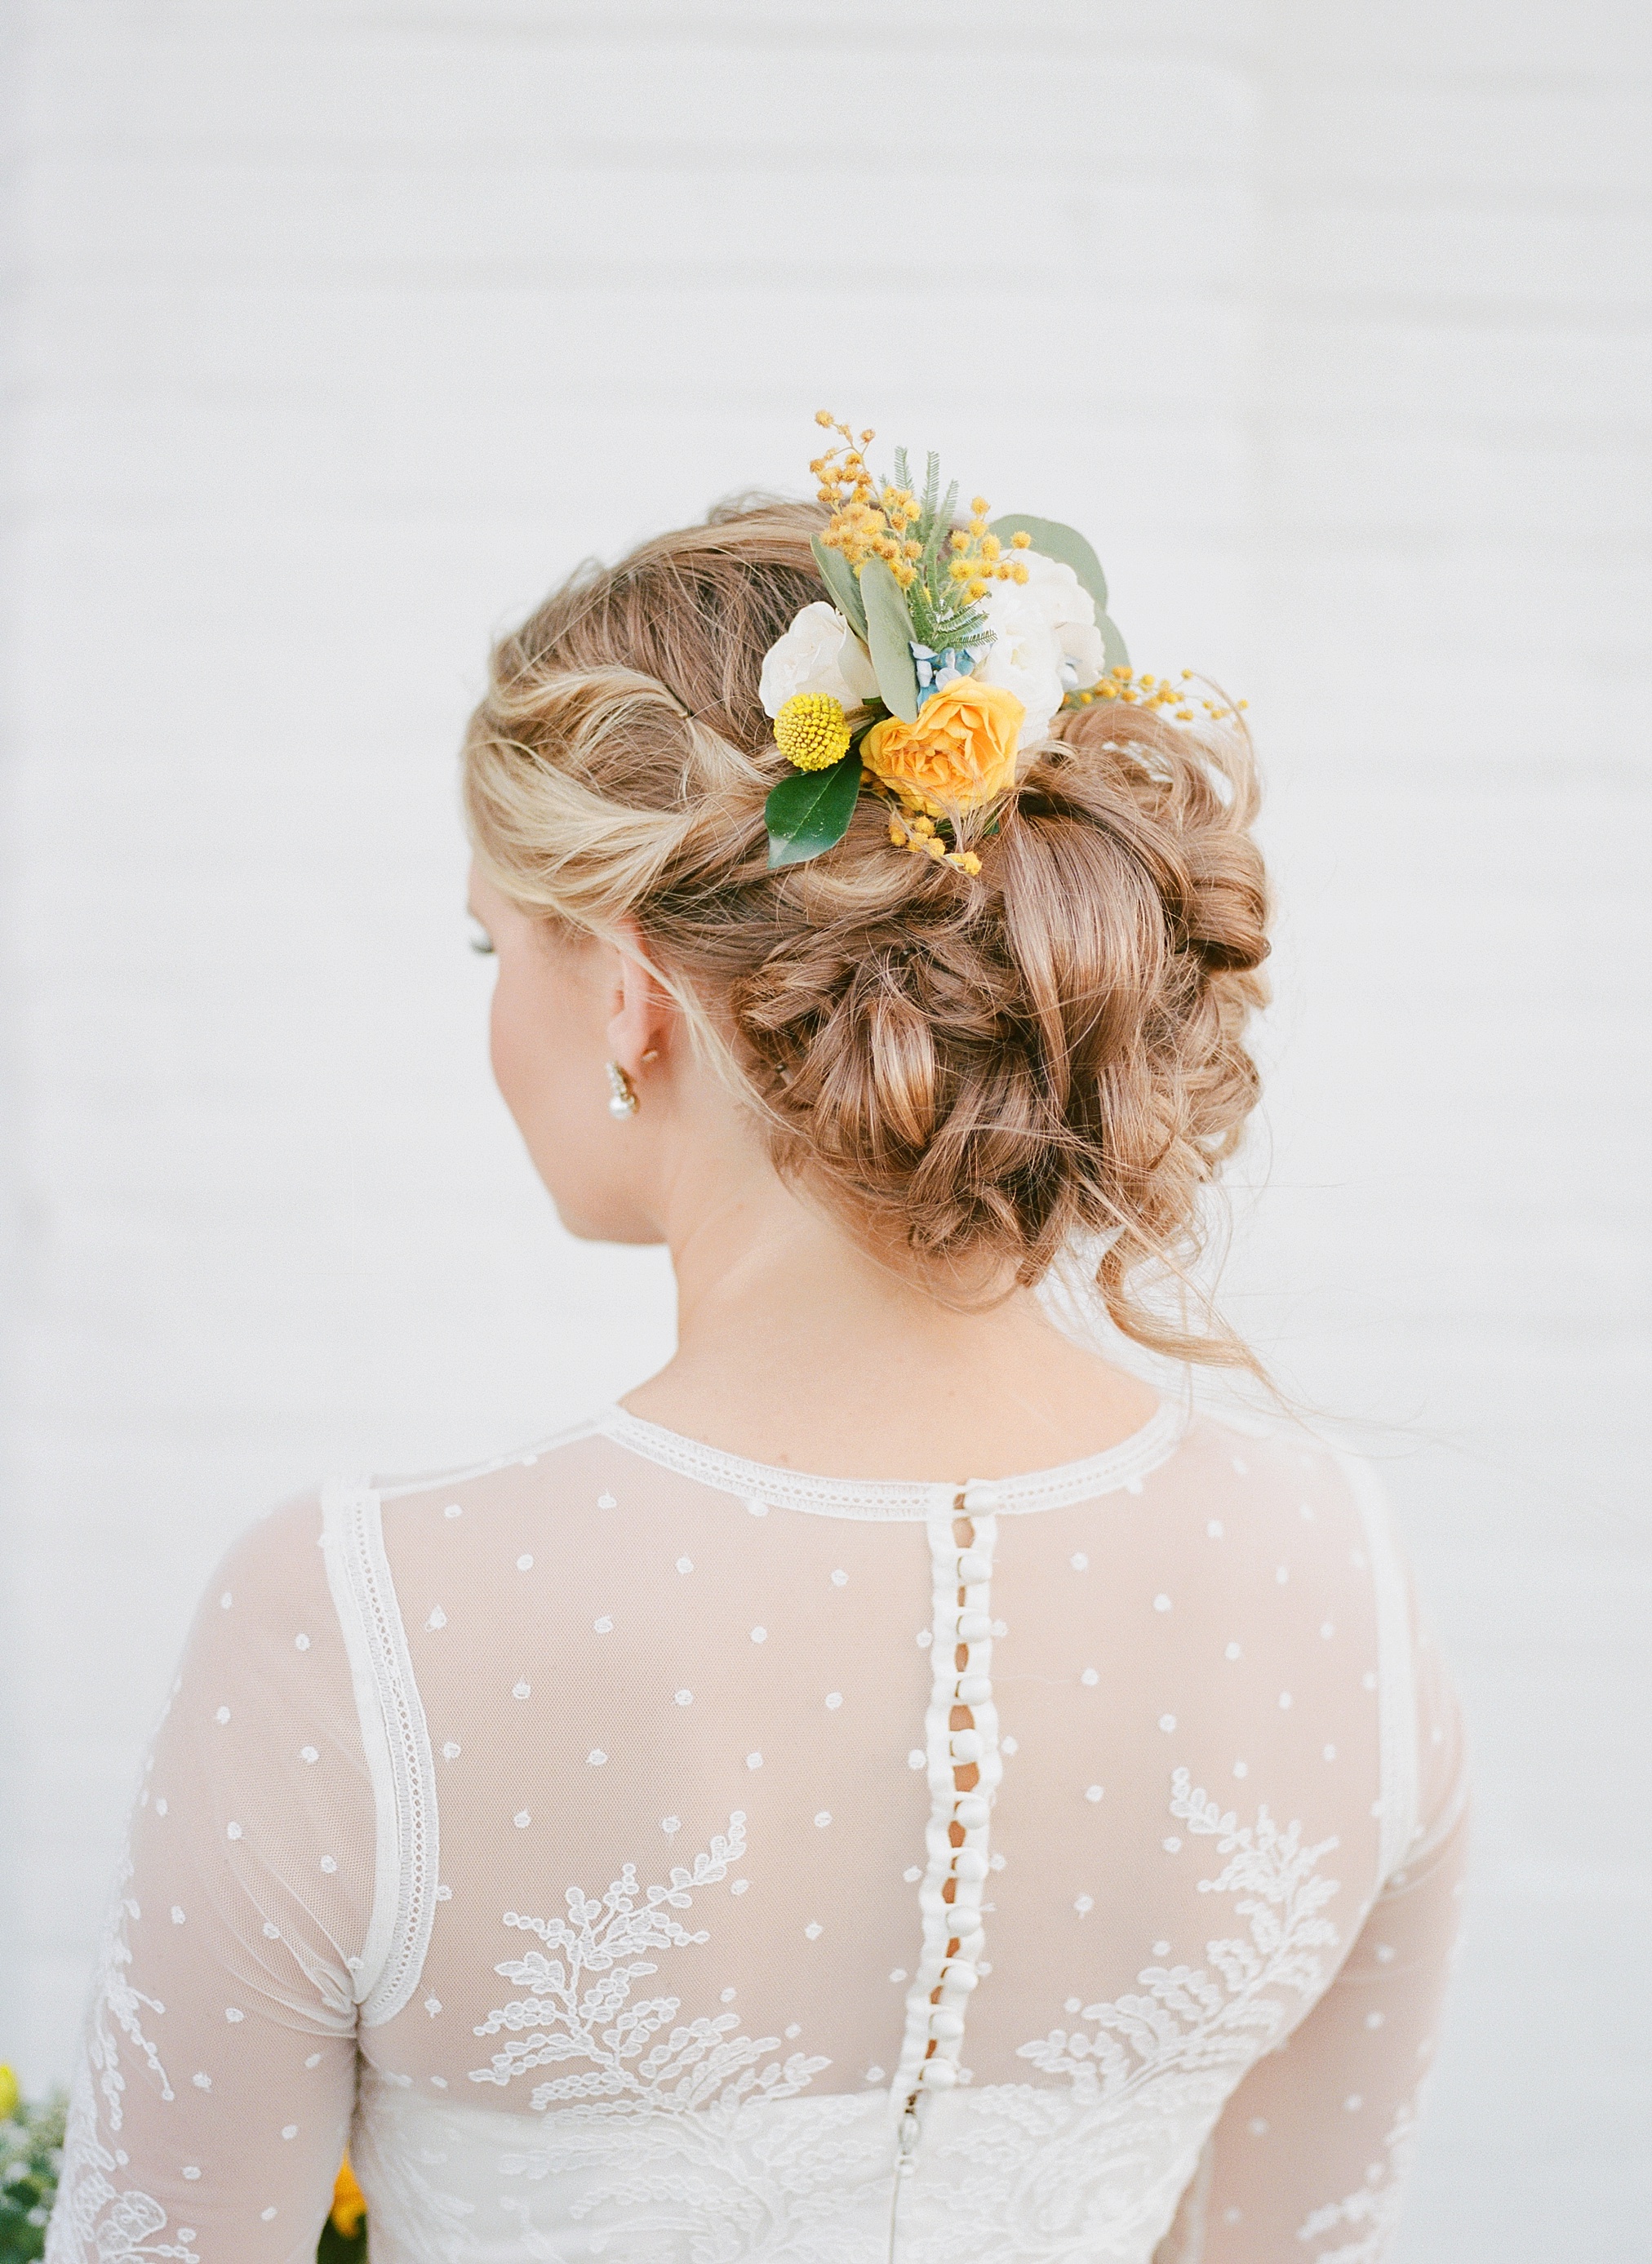 Wedding hair inspiration with florals 